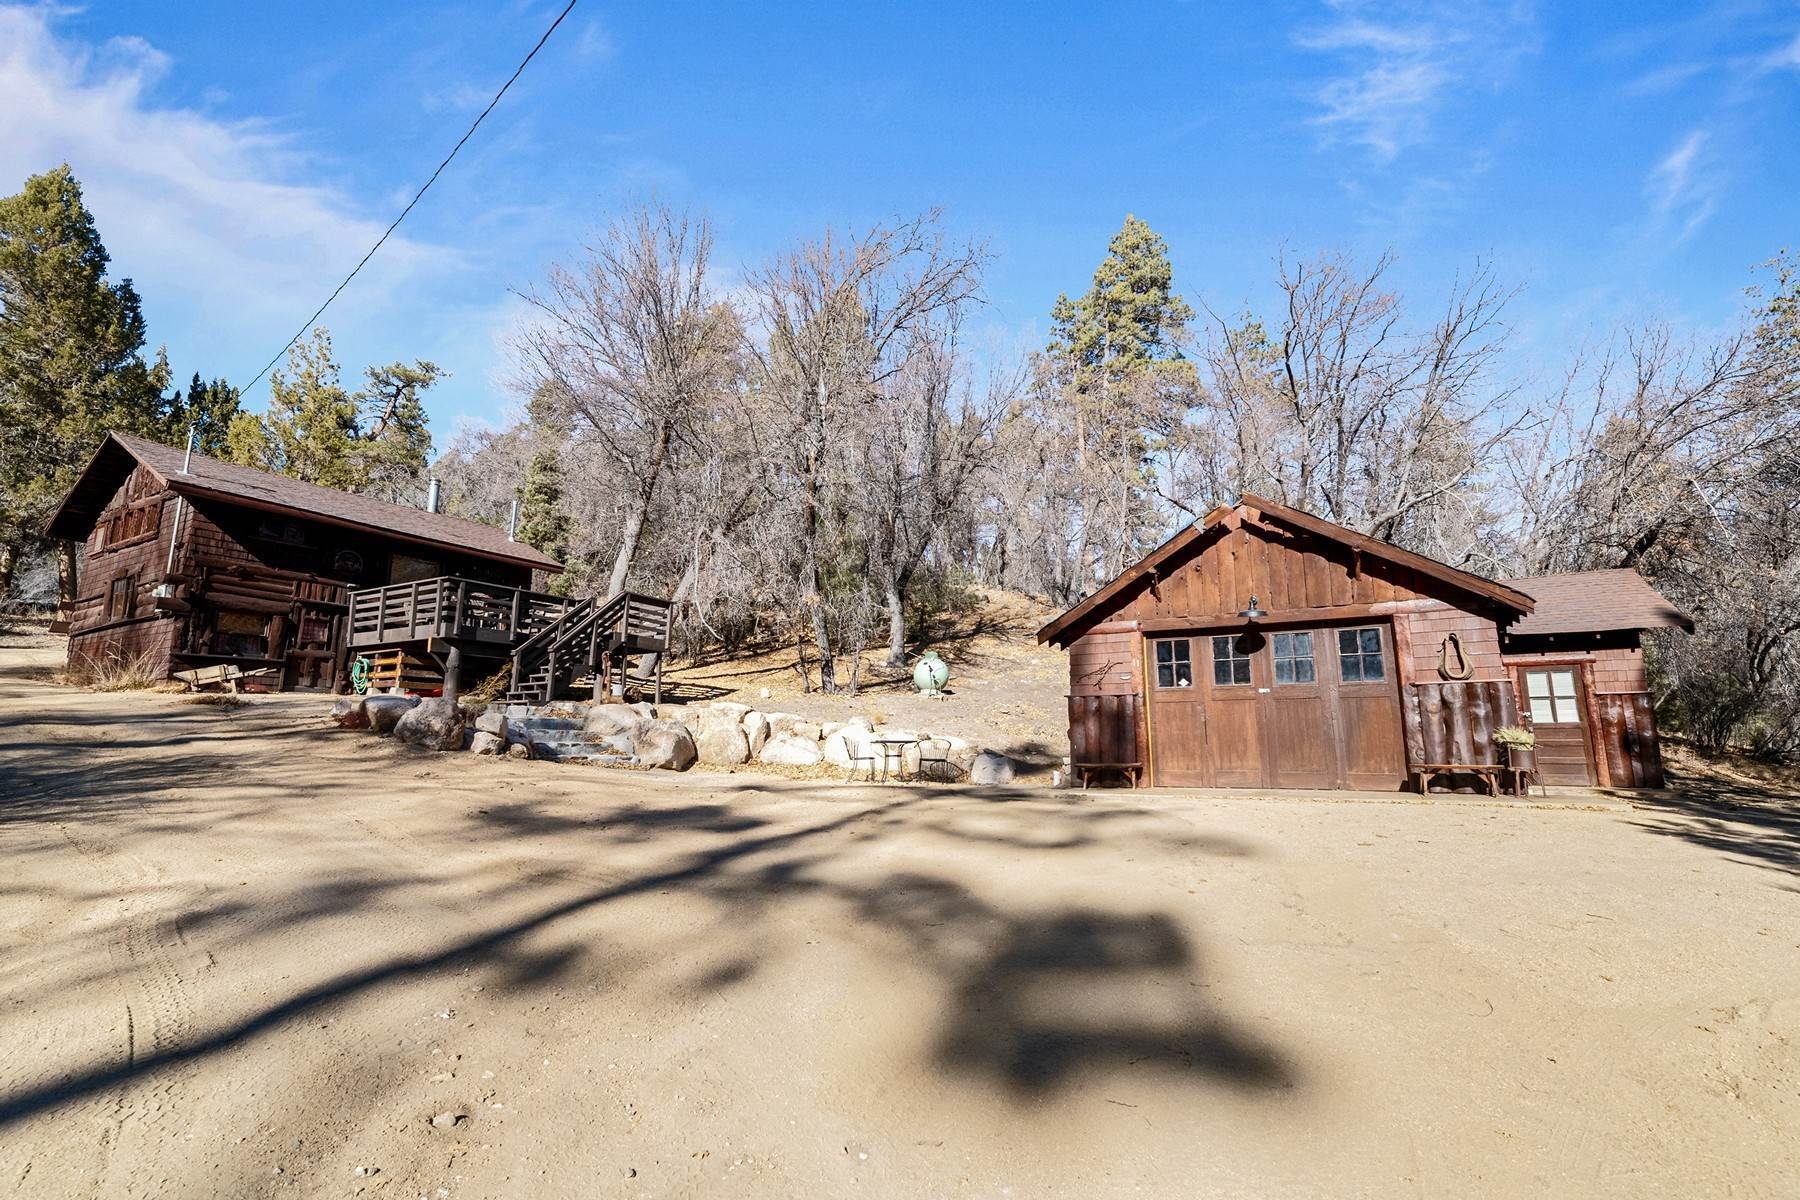 Single Family Homes for Sale at 11 Polique Canyon Trail, Fawnskin, Ca 92333 11 Polique Canyon Trail Fawnskin, California 92333 United States